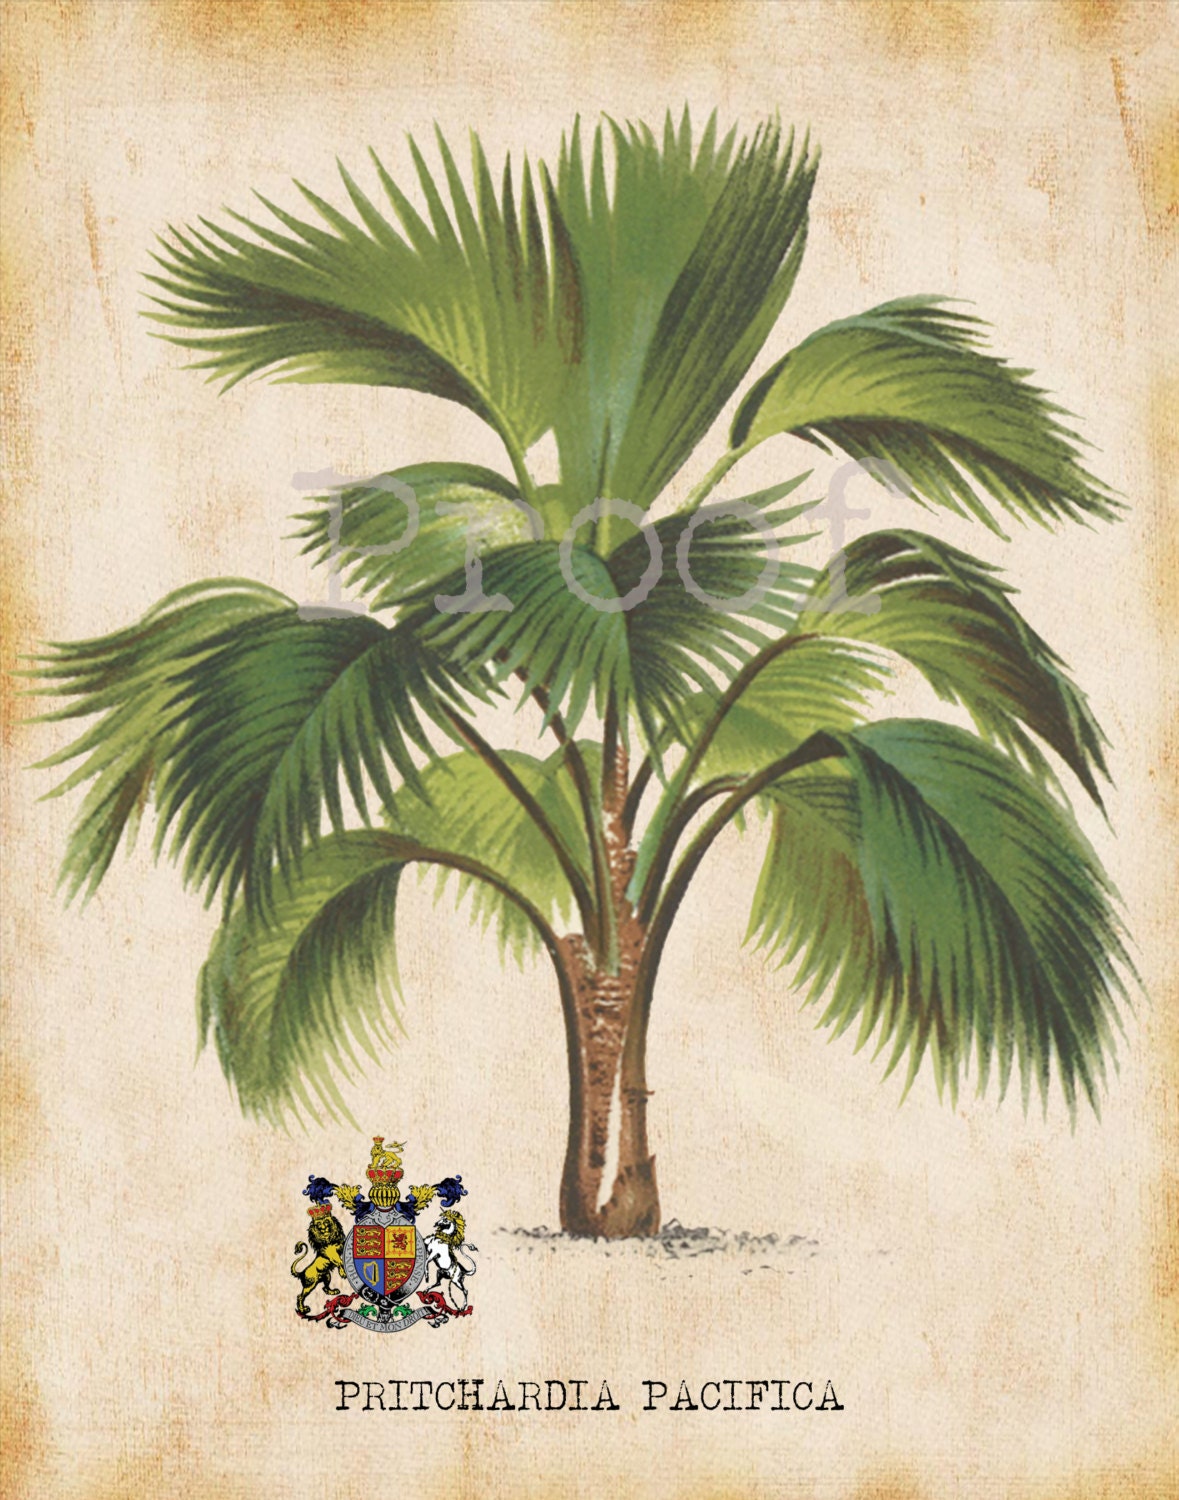 Palm Tree Art Print For You To Print 8" x 10" & 11" x 14" Antique Tropical Palms Wall Decor Botanical Print Picture Instant Download